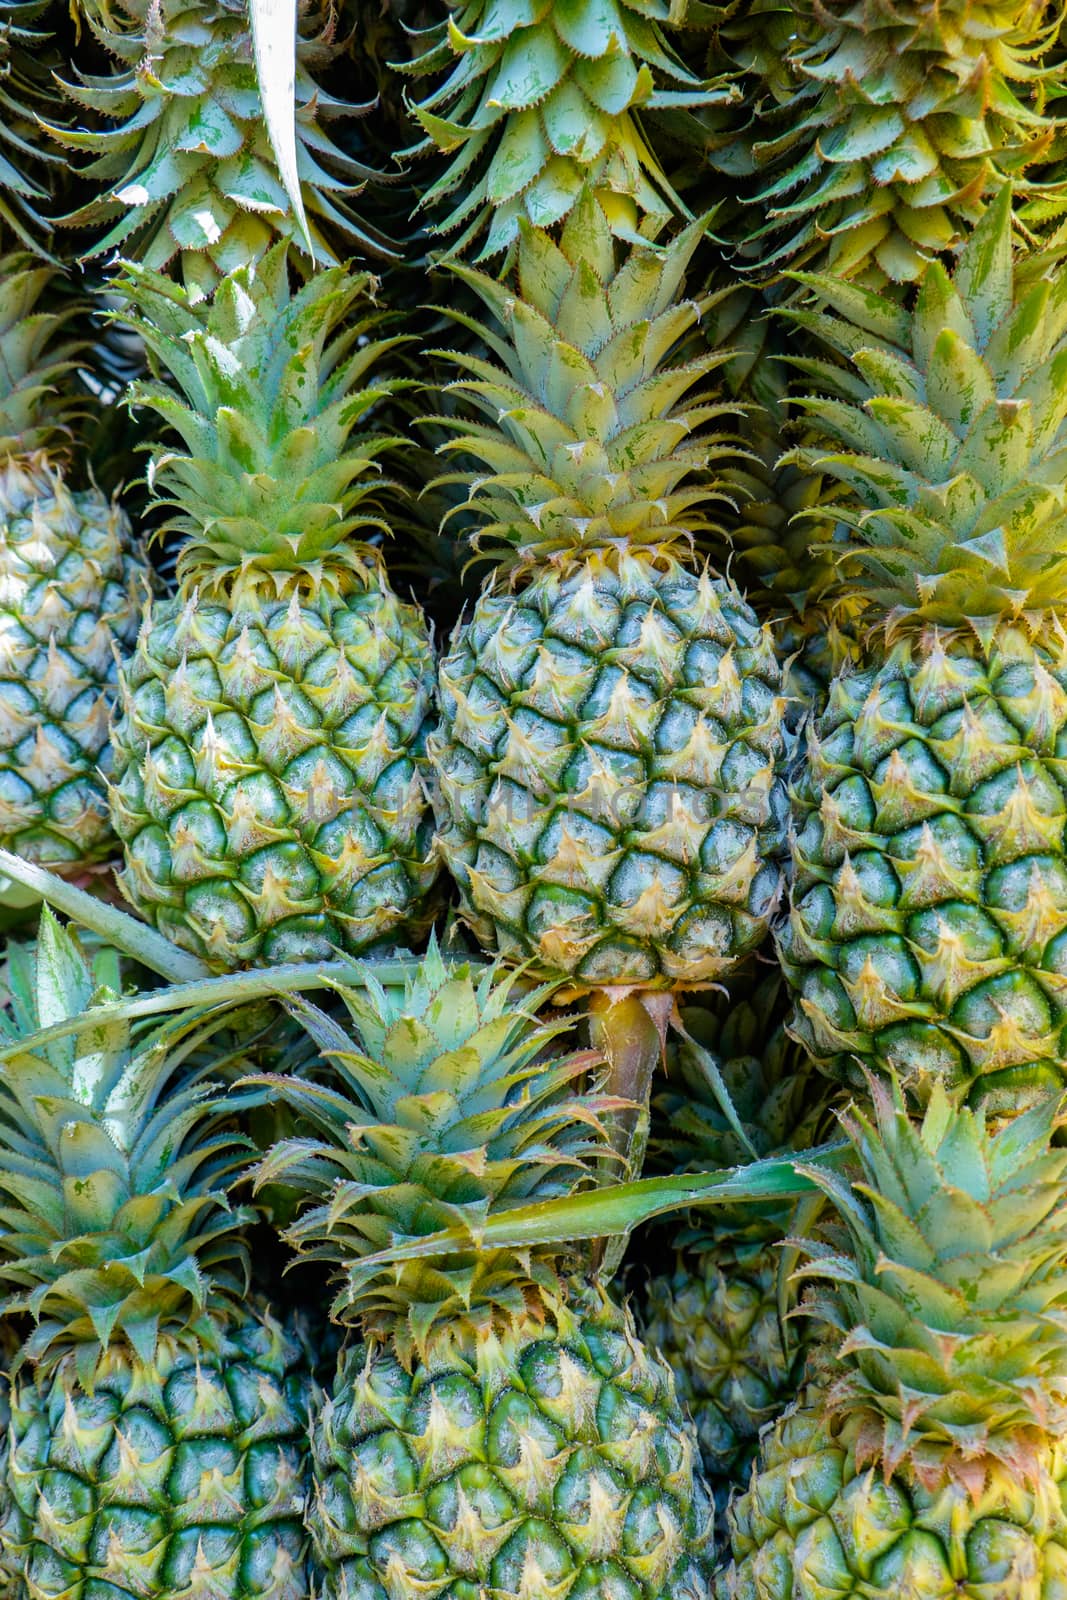 pineapples in a market place